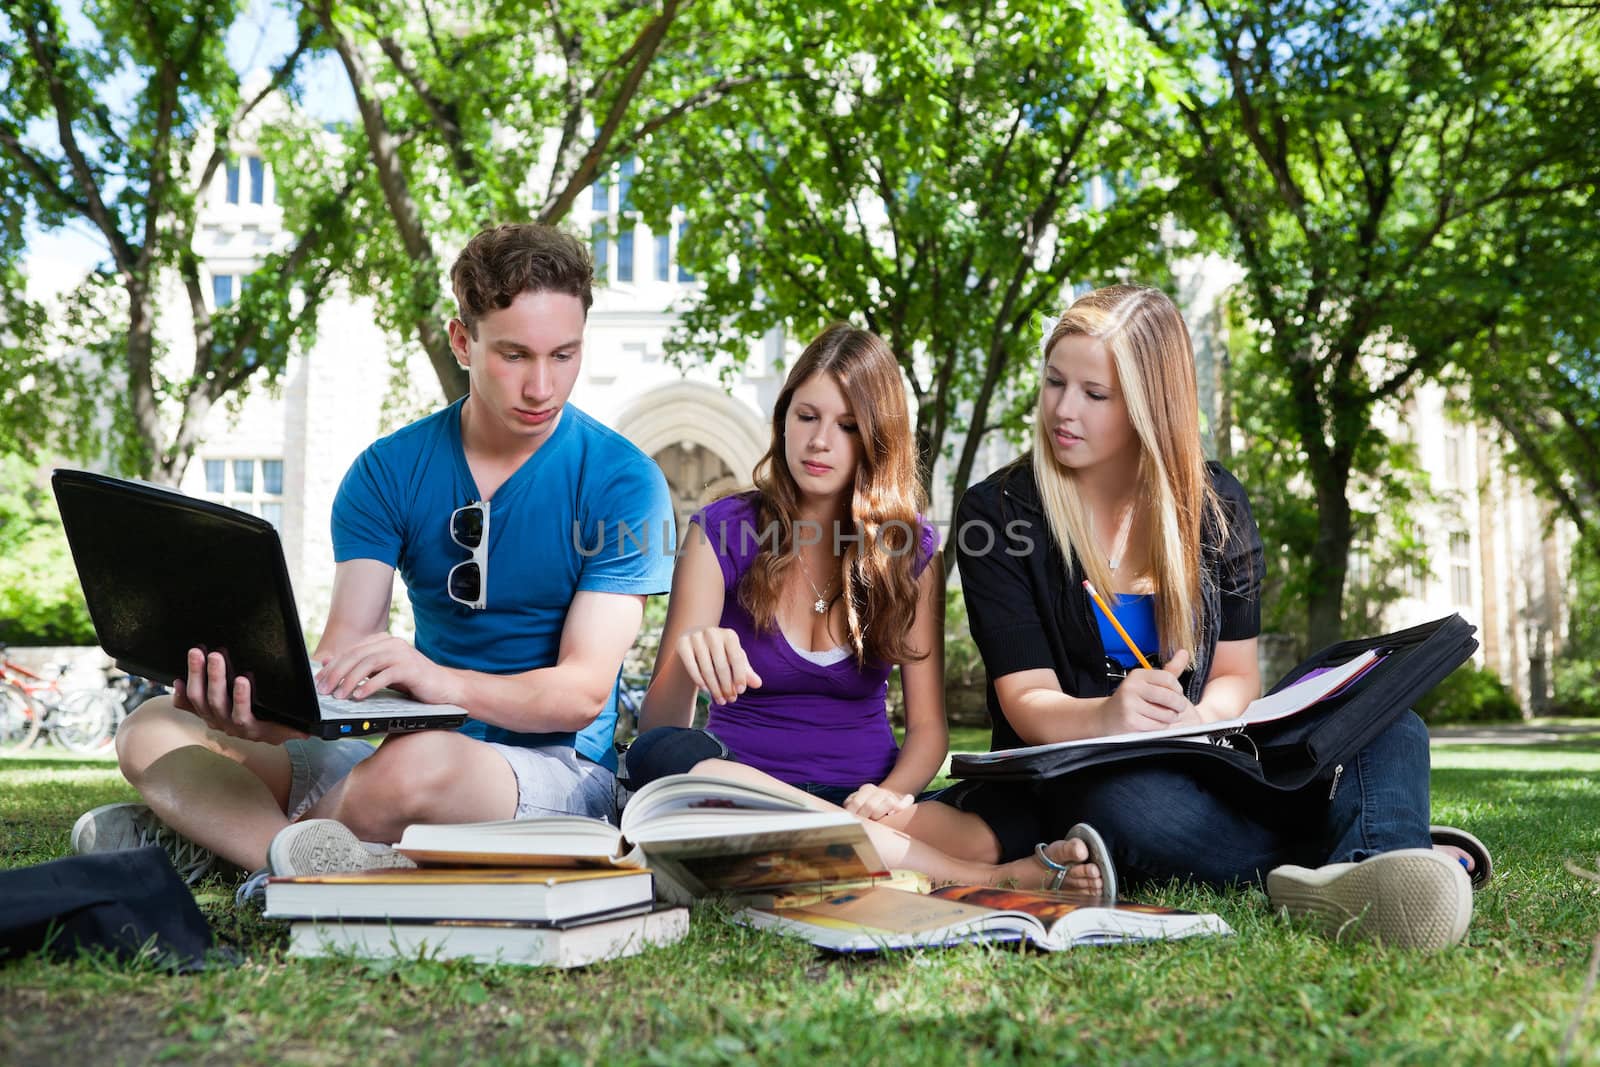 Group of college students studying together on campus ground